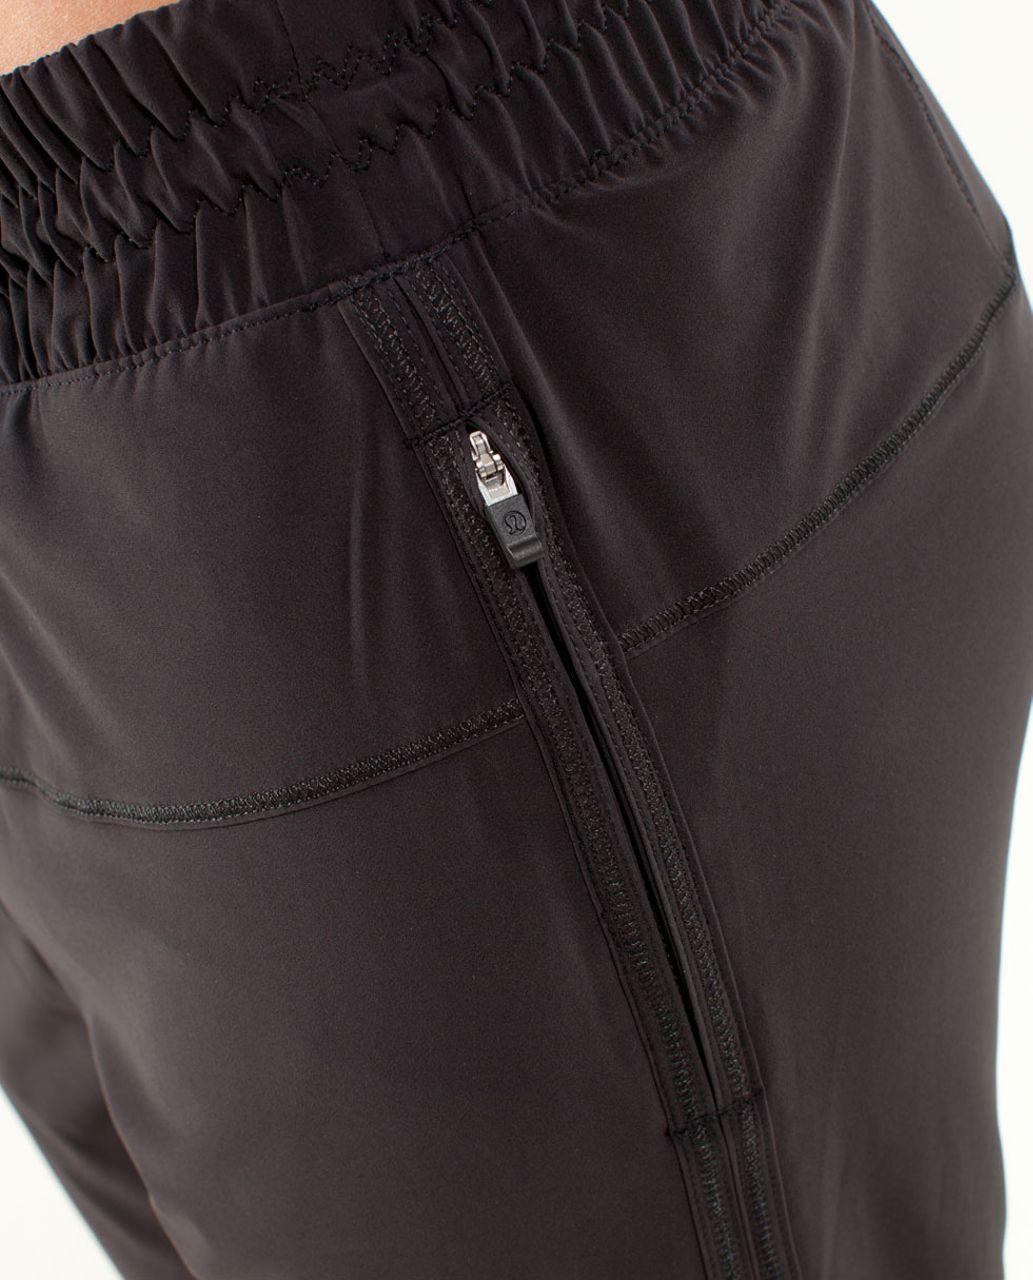 Lululemon Track To Reality Pant (First Release) - Black